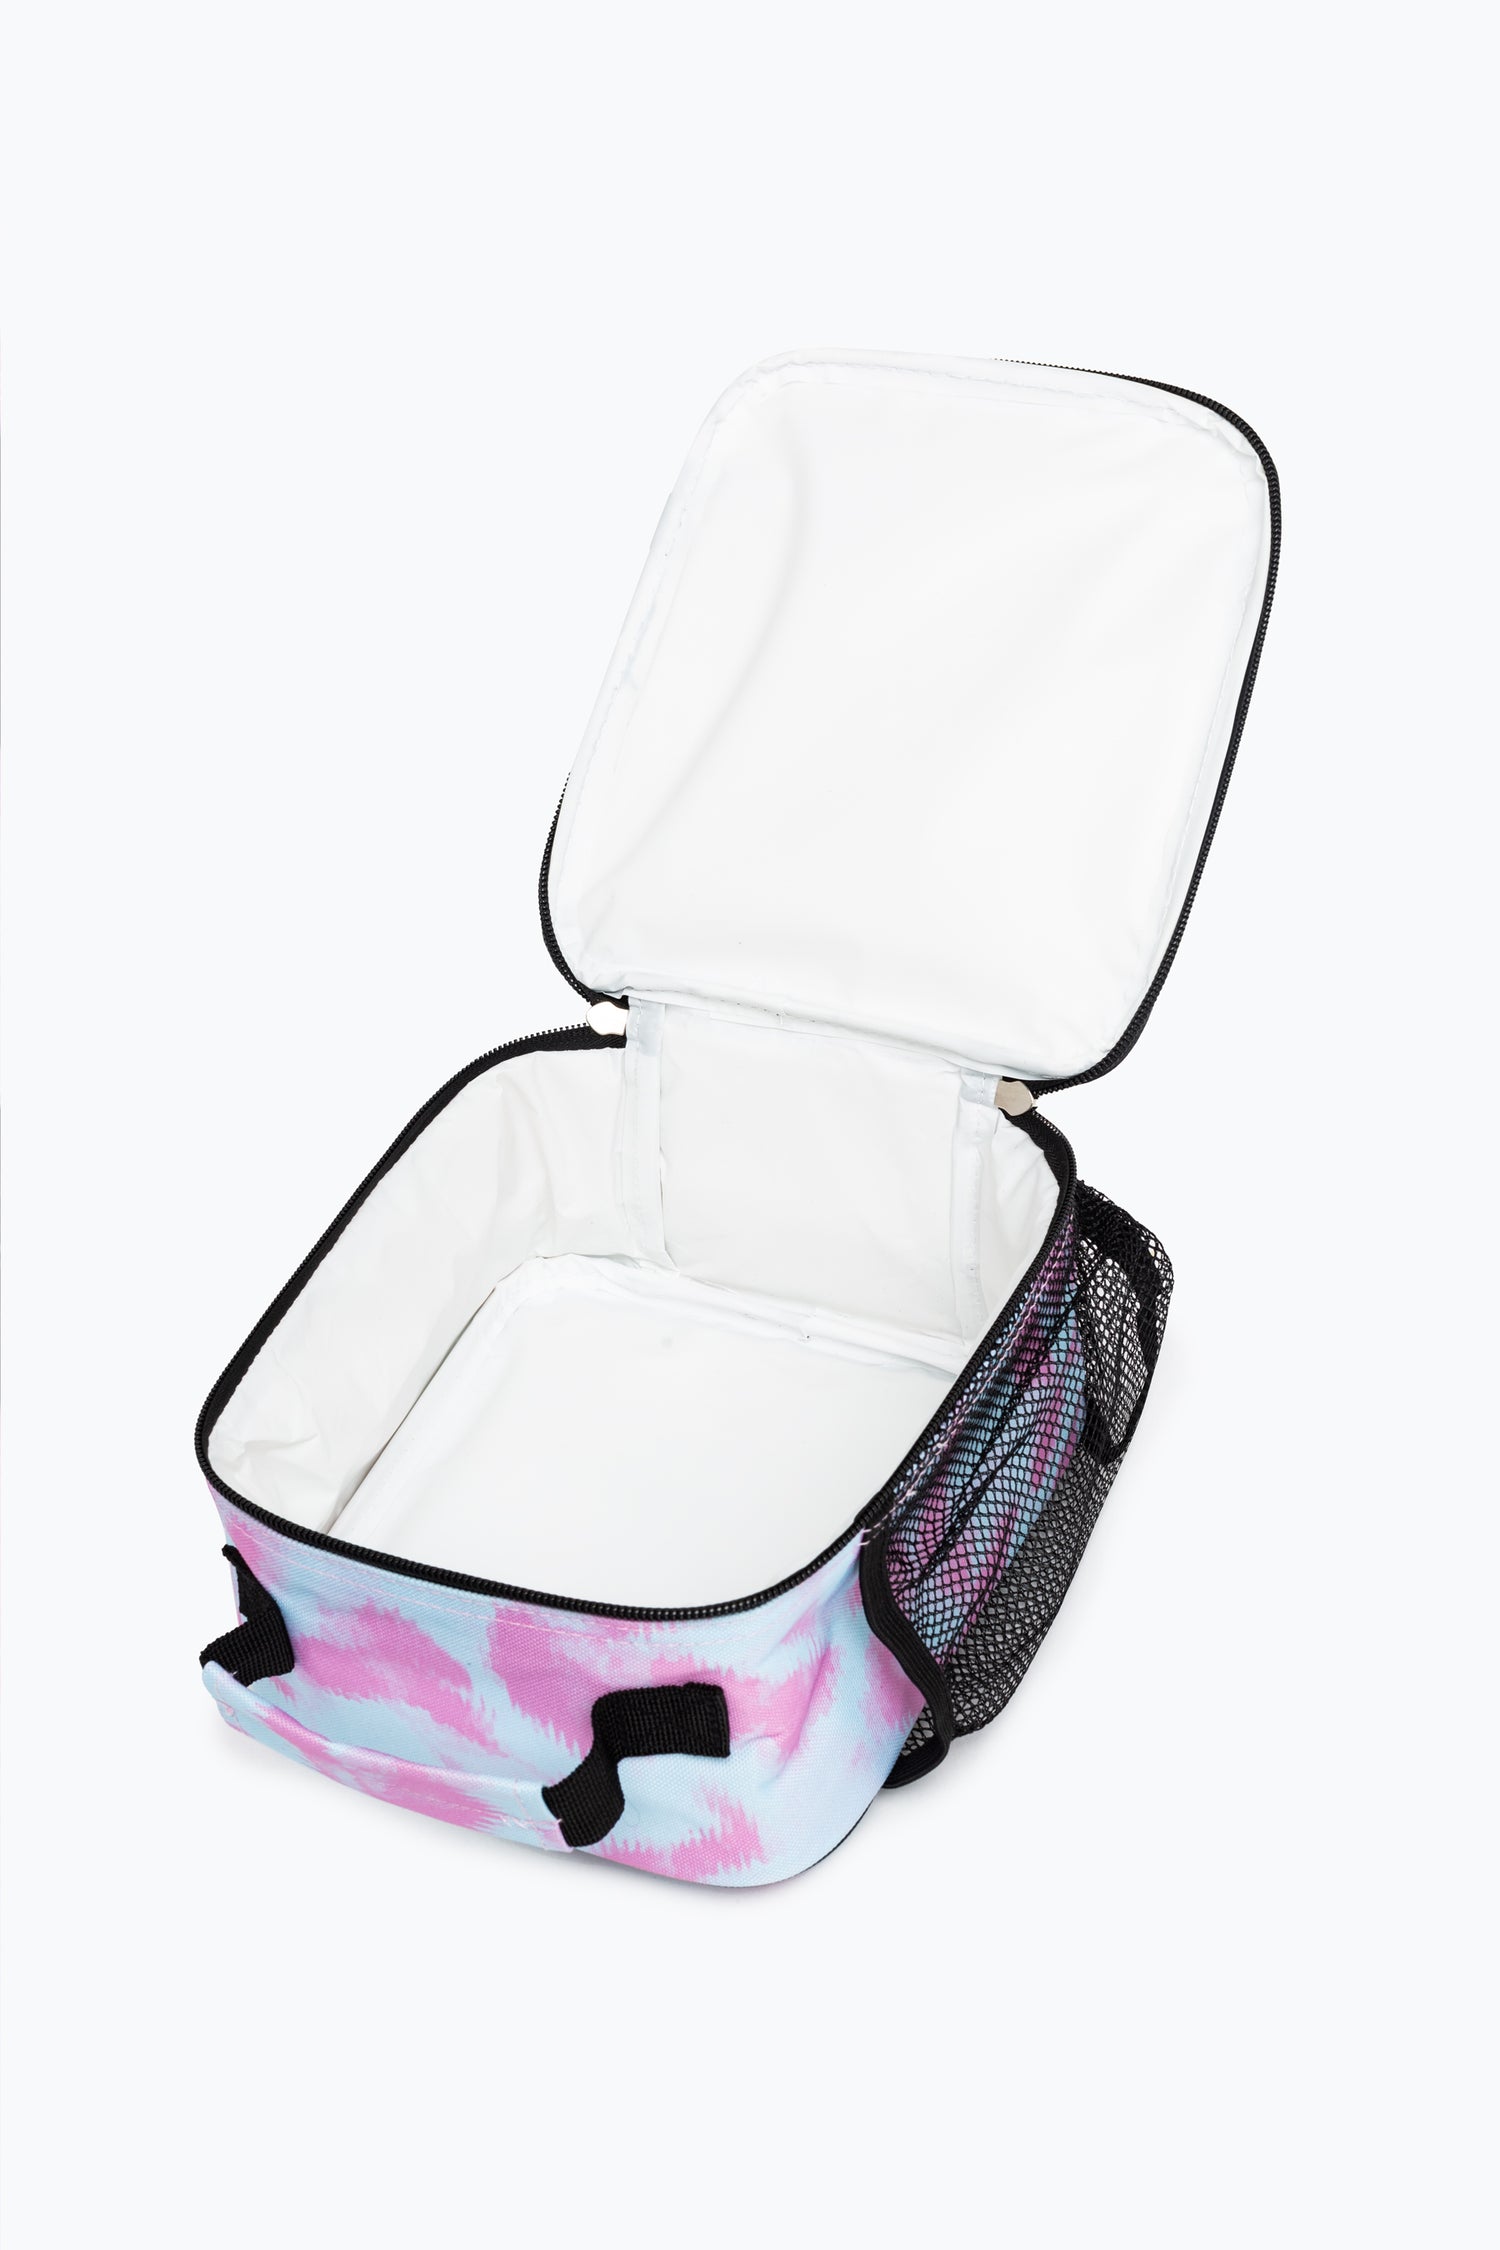 HYPE UNISEX SPLODGE TIE DYE BLUE AND LILAC CREST LUNCHBOX